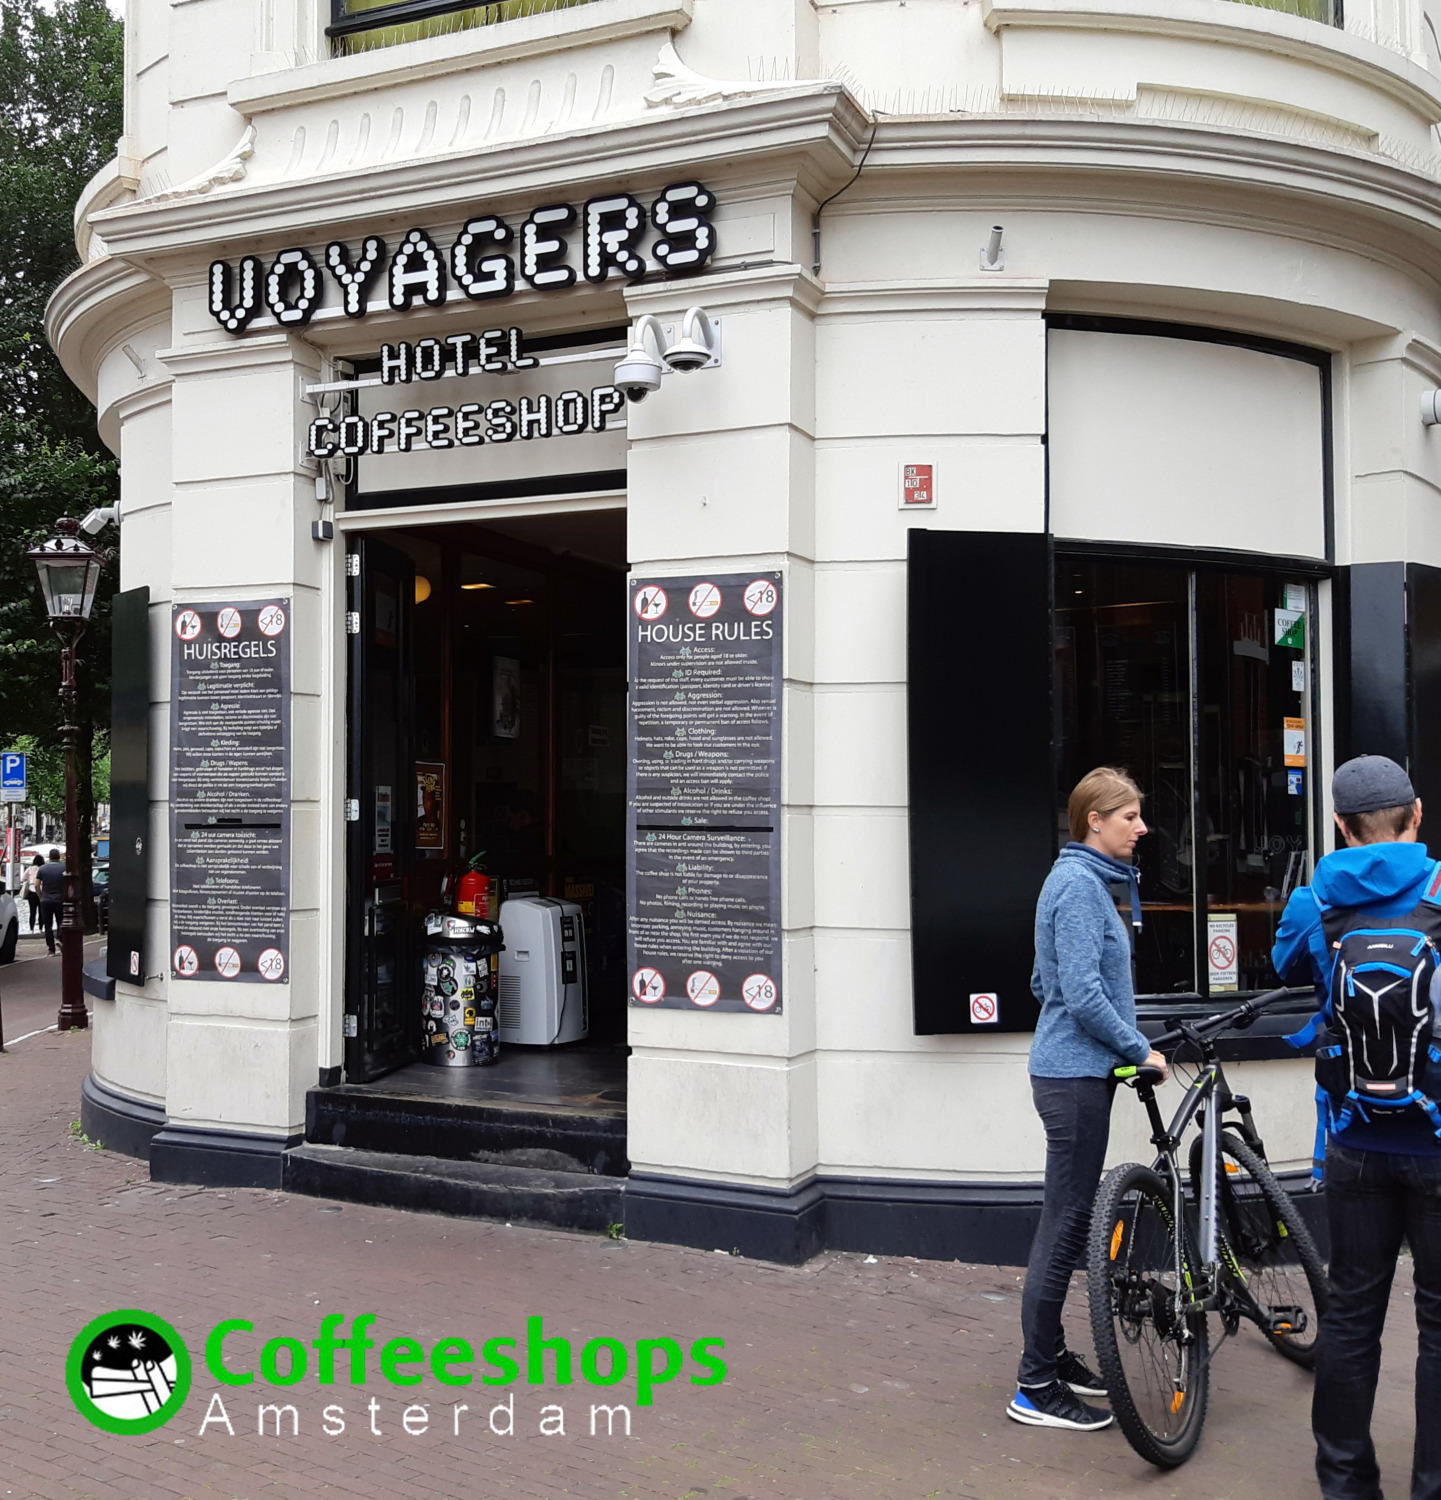 voyagers hotel coffee shop